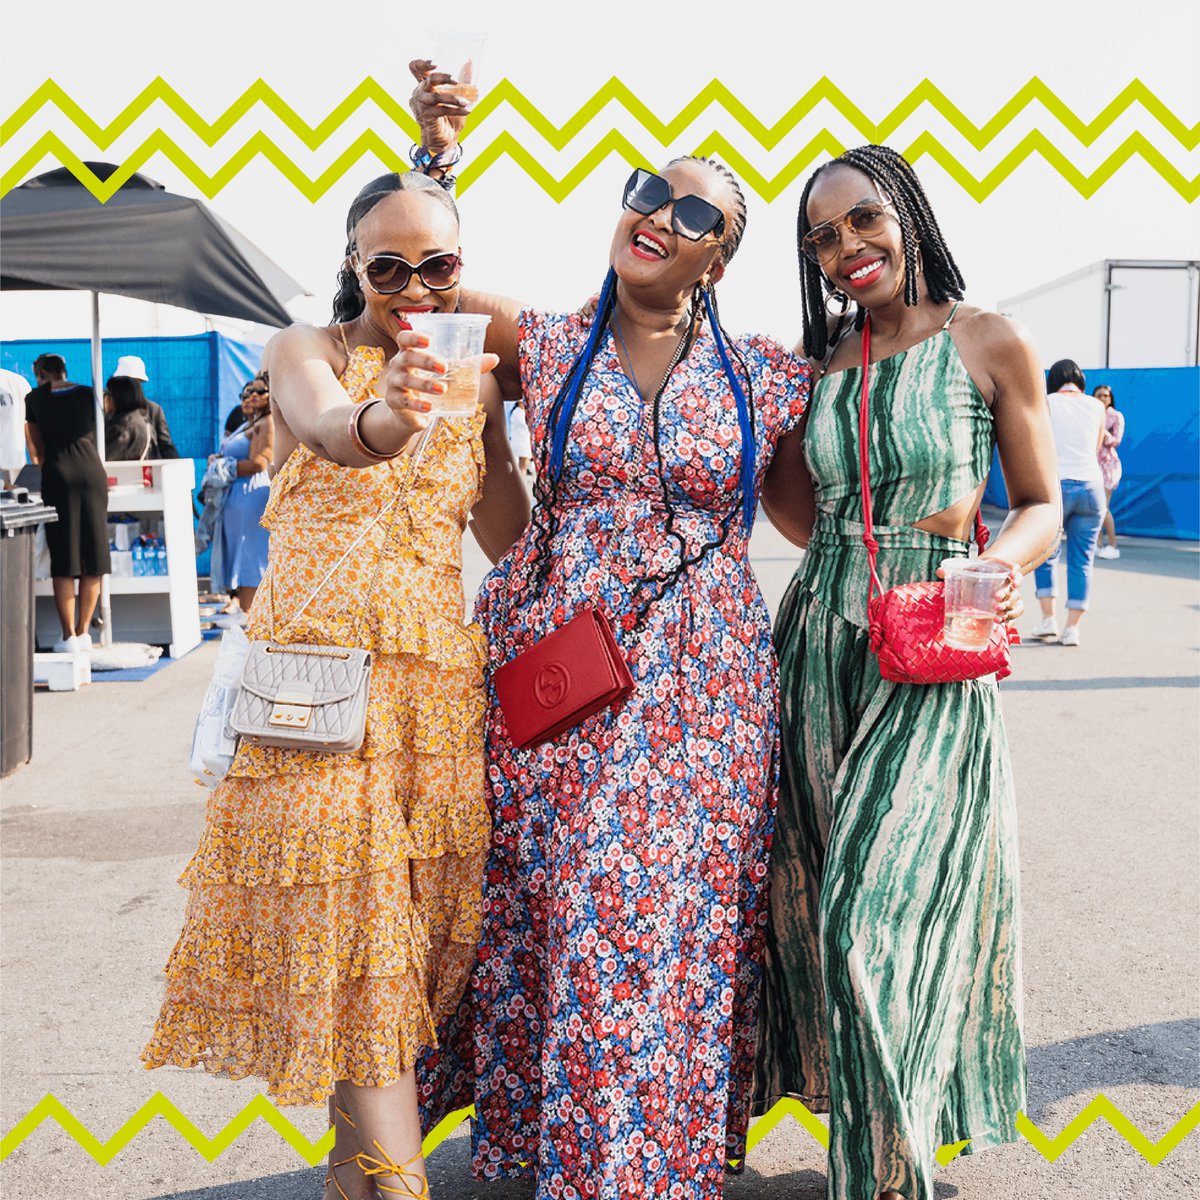 Fashion at #DStvDeliciousFestival was on fire! We came, we slayed, and we made unforgettable memories in style. #GPLifestyle #VisitGauteng #FoodAndMusicFestival #MusicFestival #MusicPeopleFood #Welcome2joburg